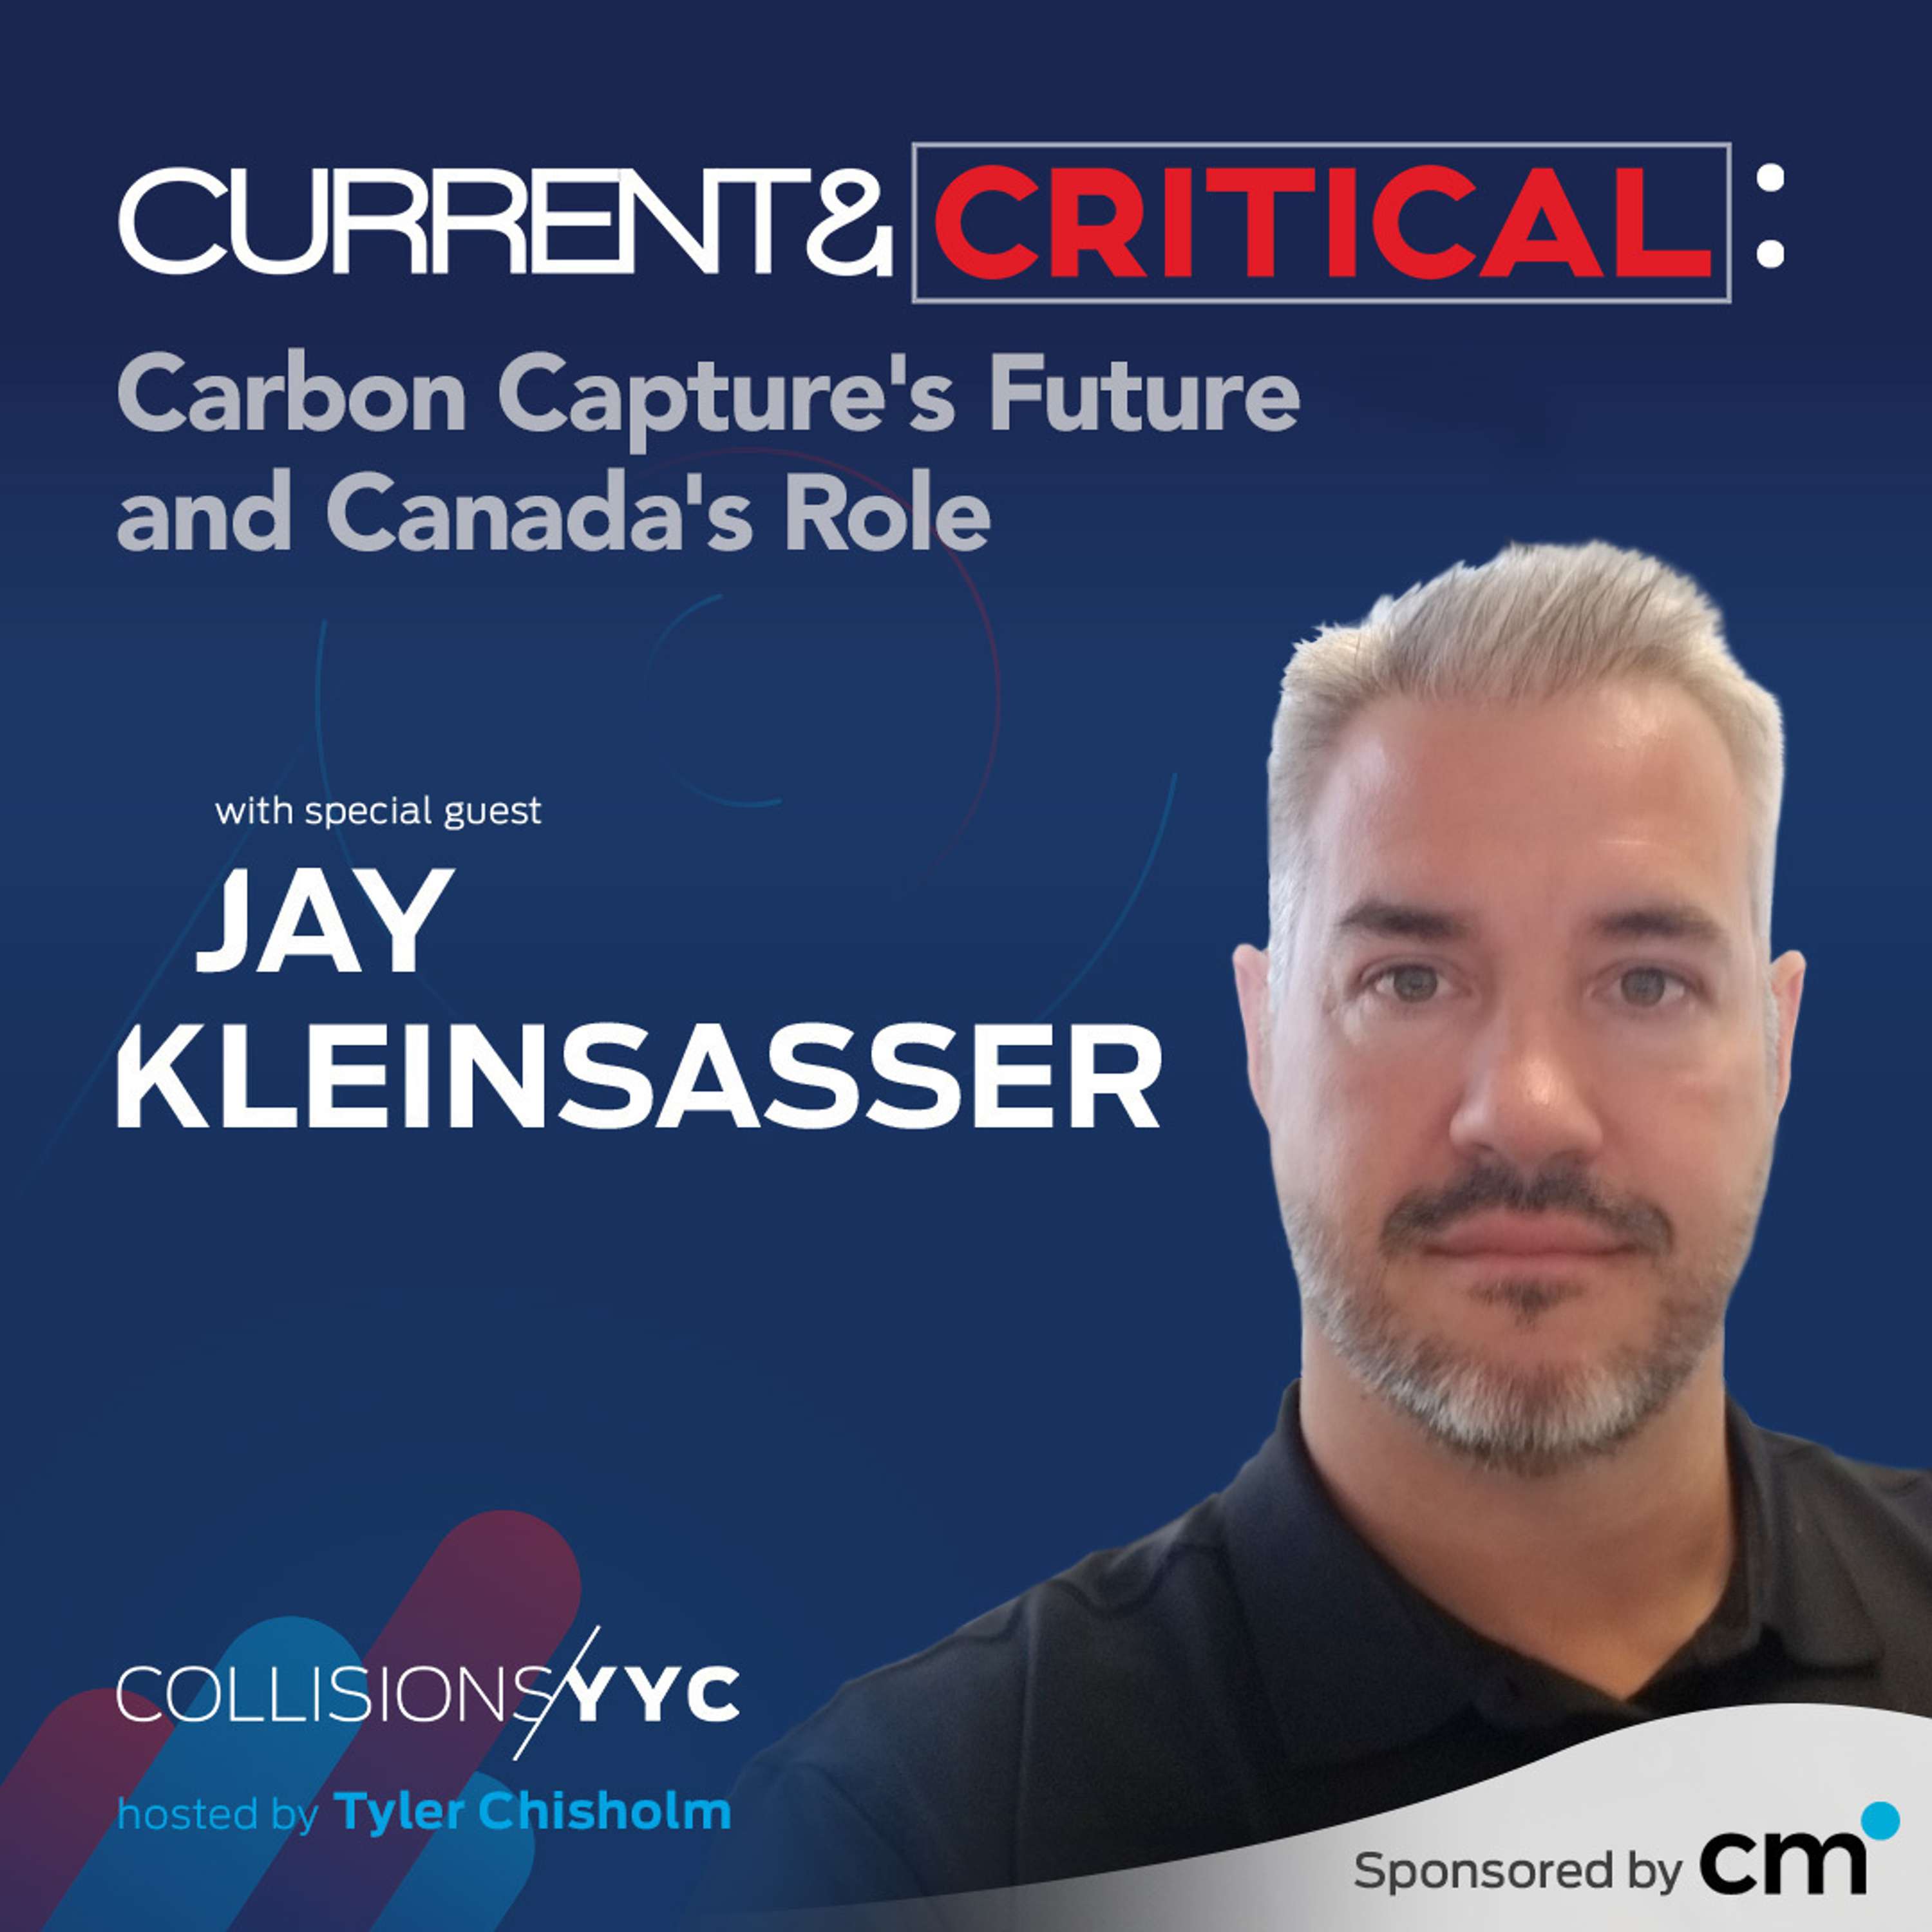 Jay Kleinsasser, Carbon Capture's Future and Canada's Role